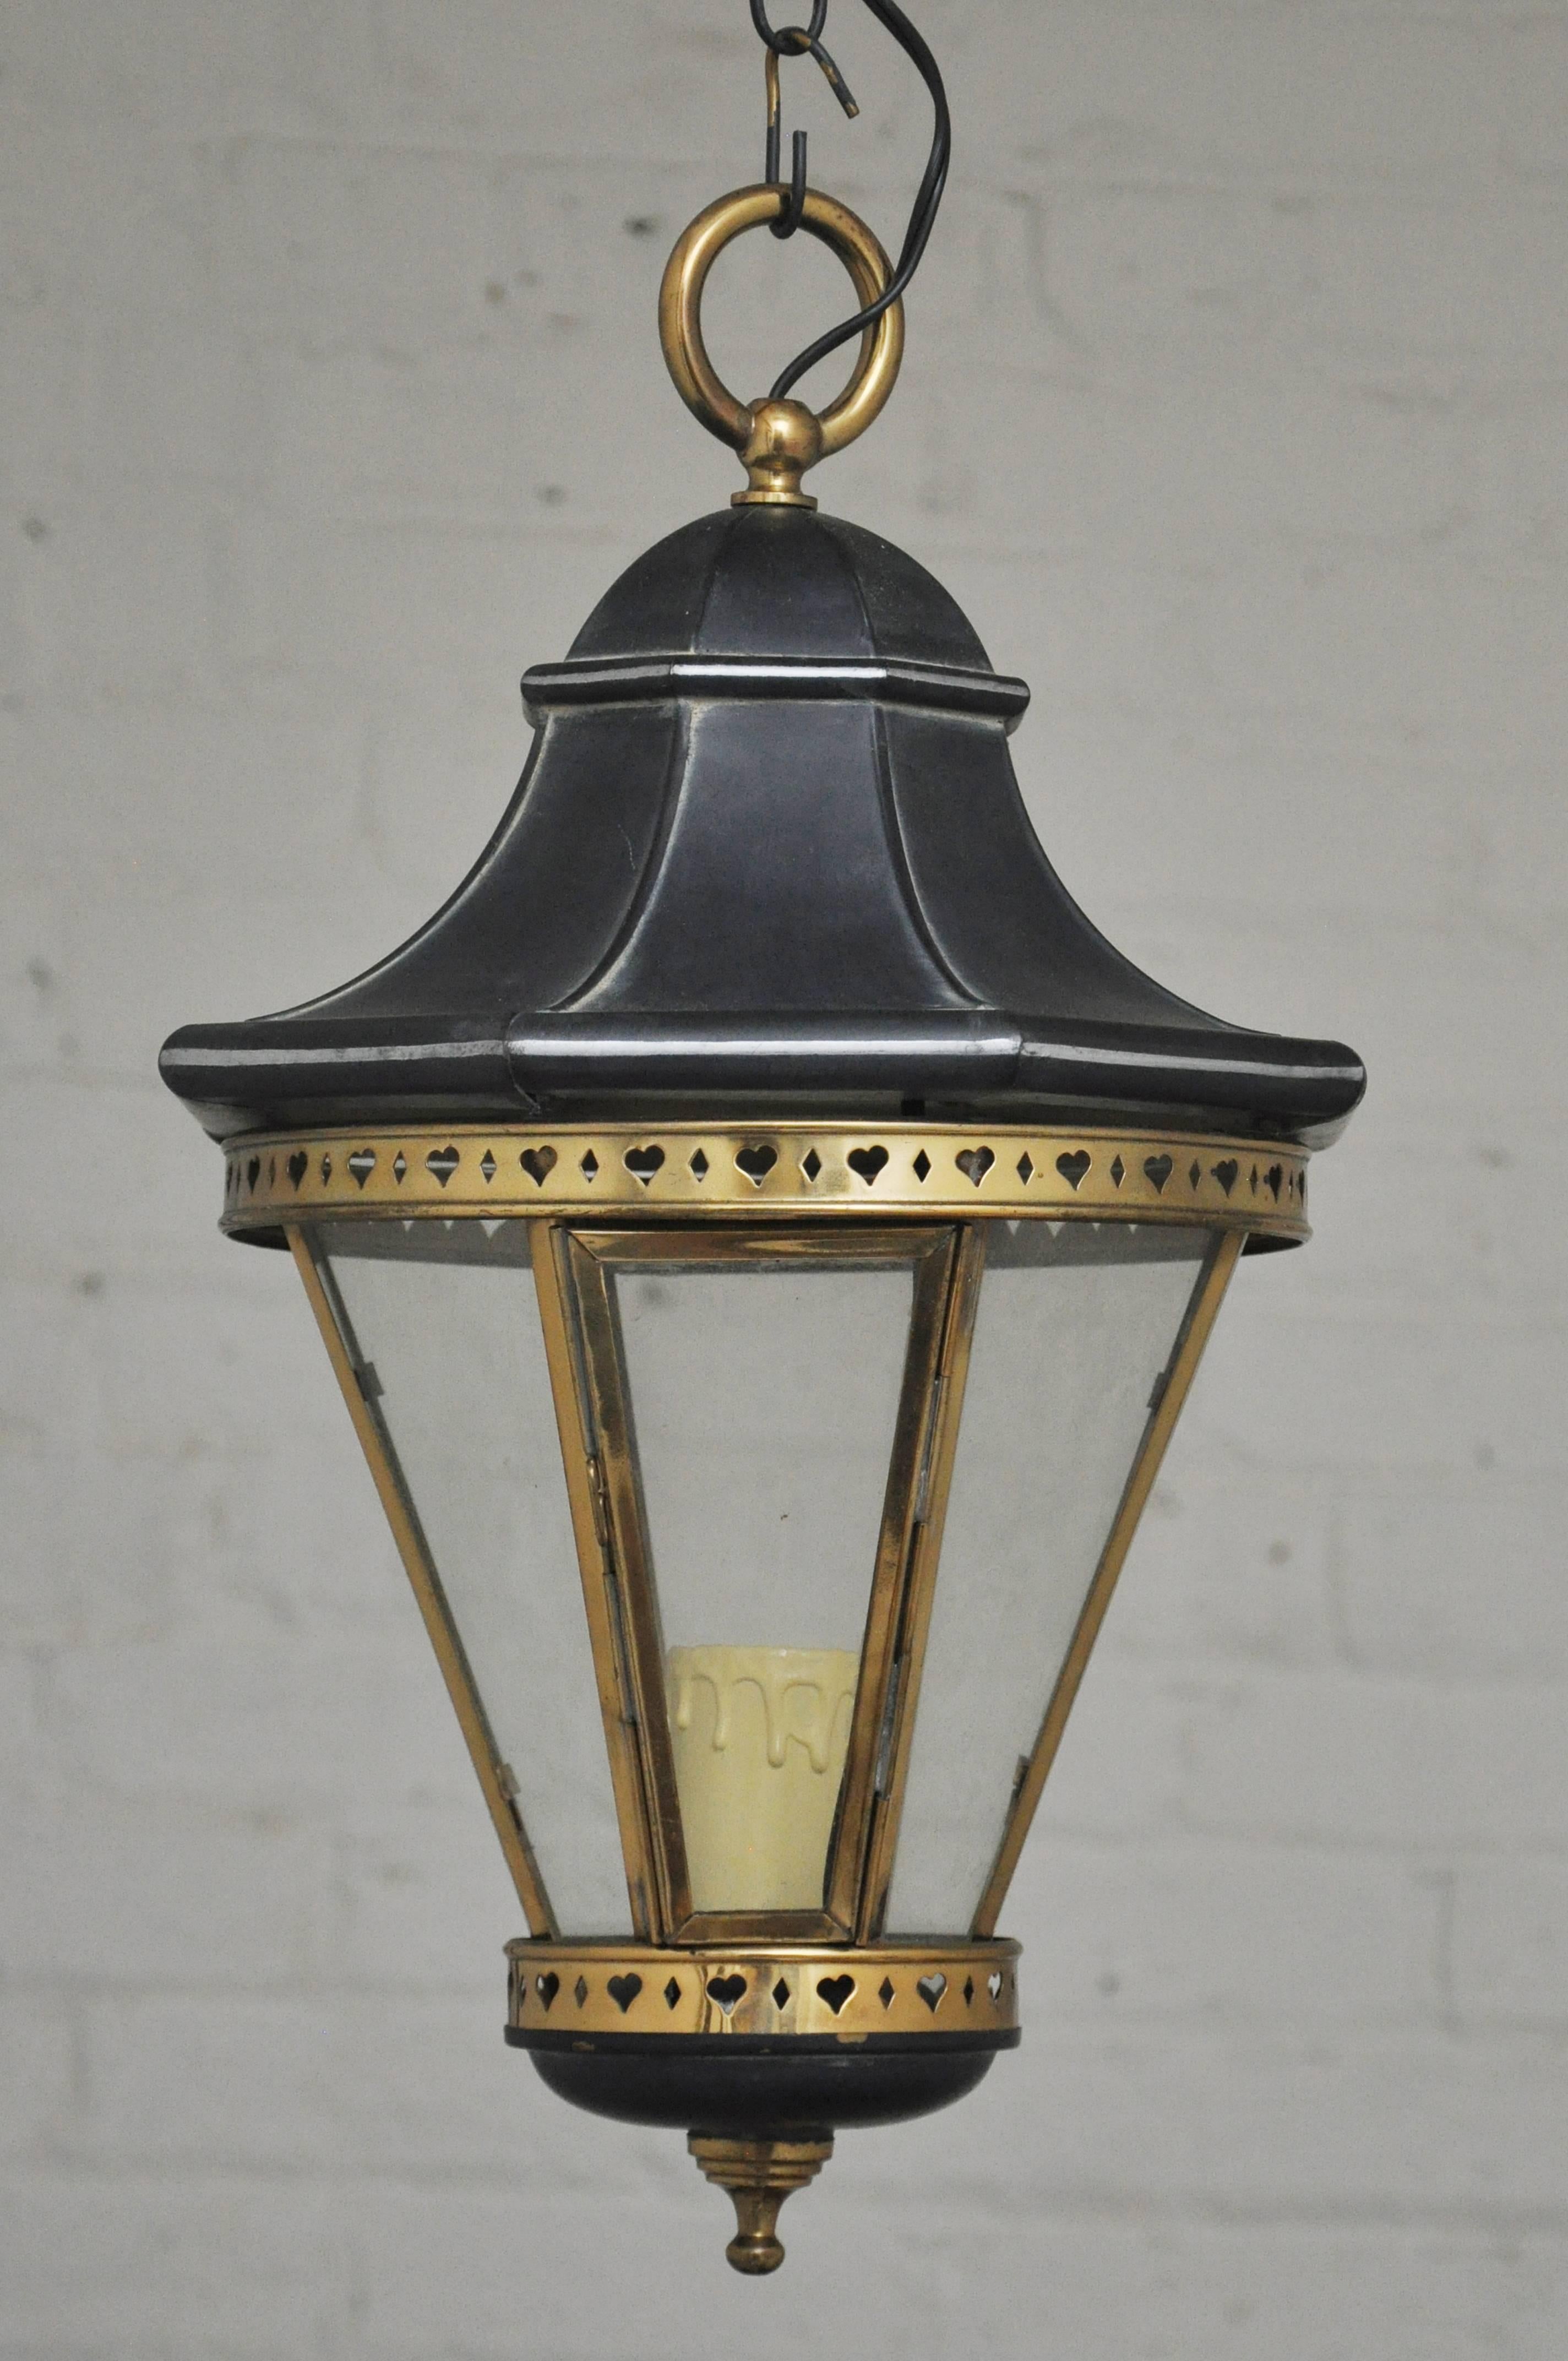 I have four available of these beautifully made lanterns. Vintage 1970s - made in Spain - but never used. Each light takes one standard size bulb up to 75 watts. Octagonal shaped with a punched out design. Re-wired and ready to install. With